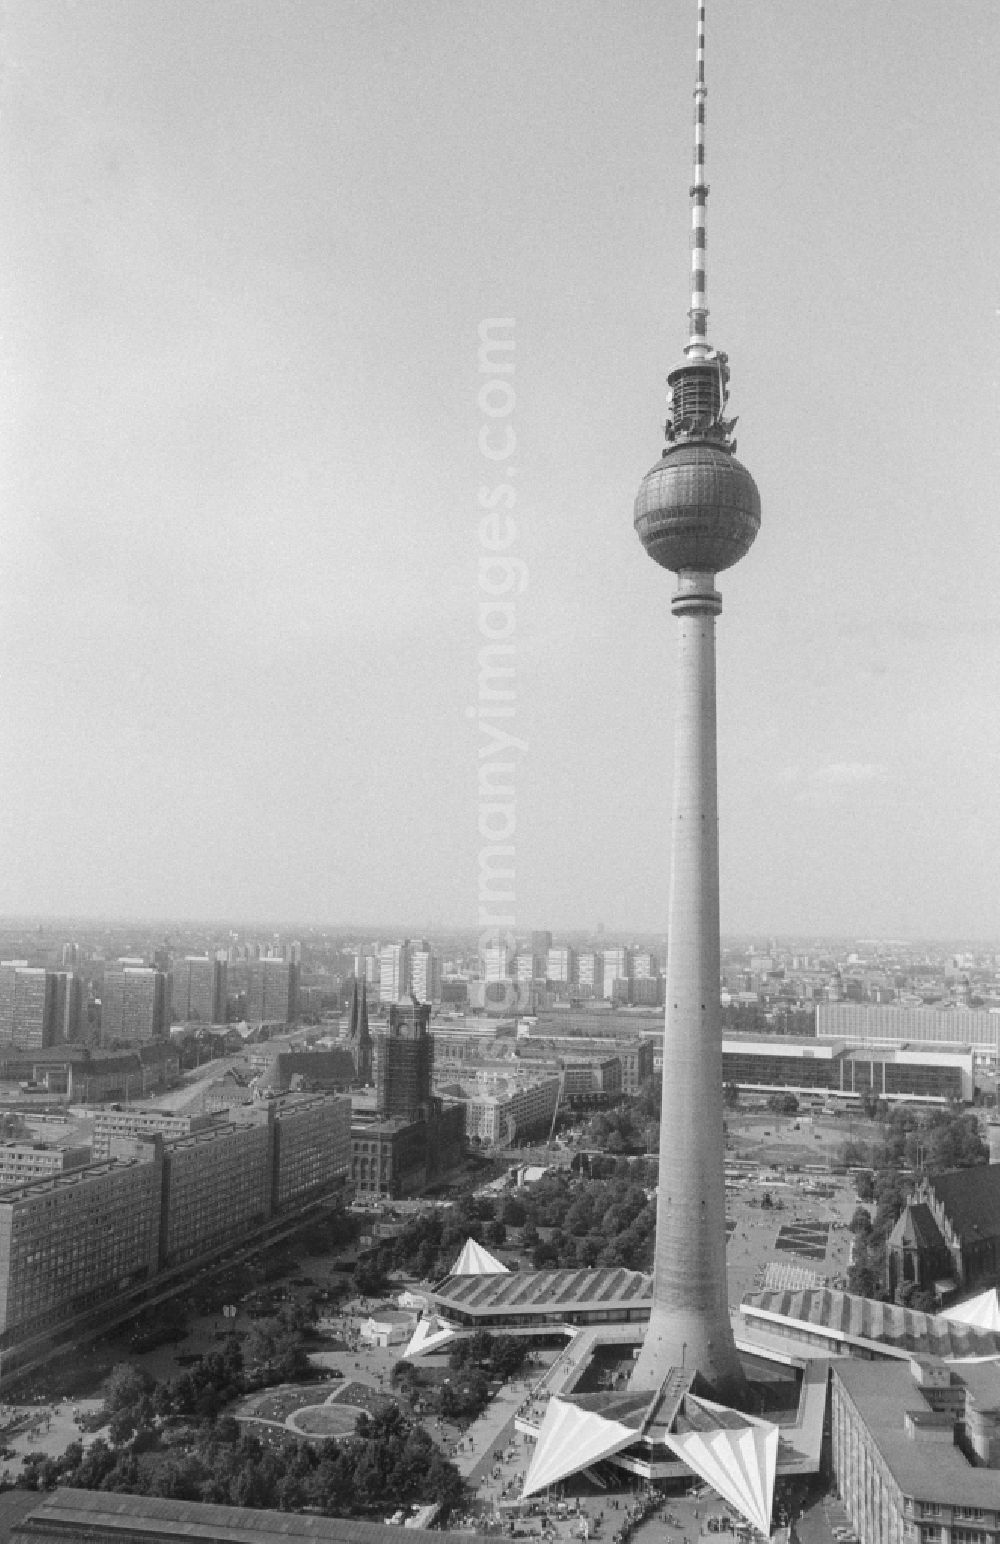 GDR image archive: Berlin - Antenna support at the top of the Fernsehturm in Berlin, the former capital of the GDR, German Democratic Republic